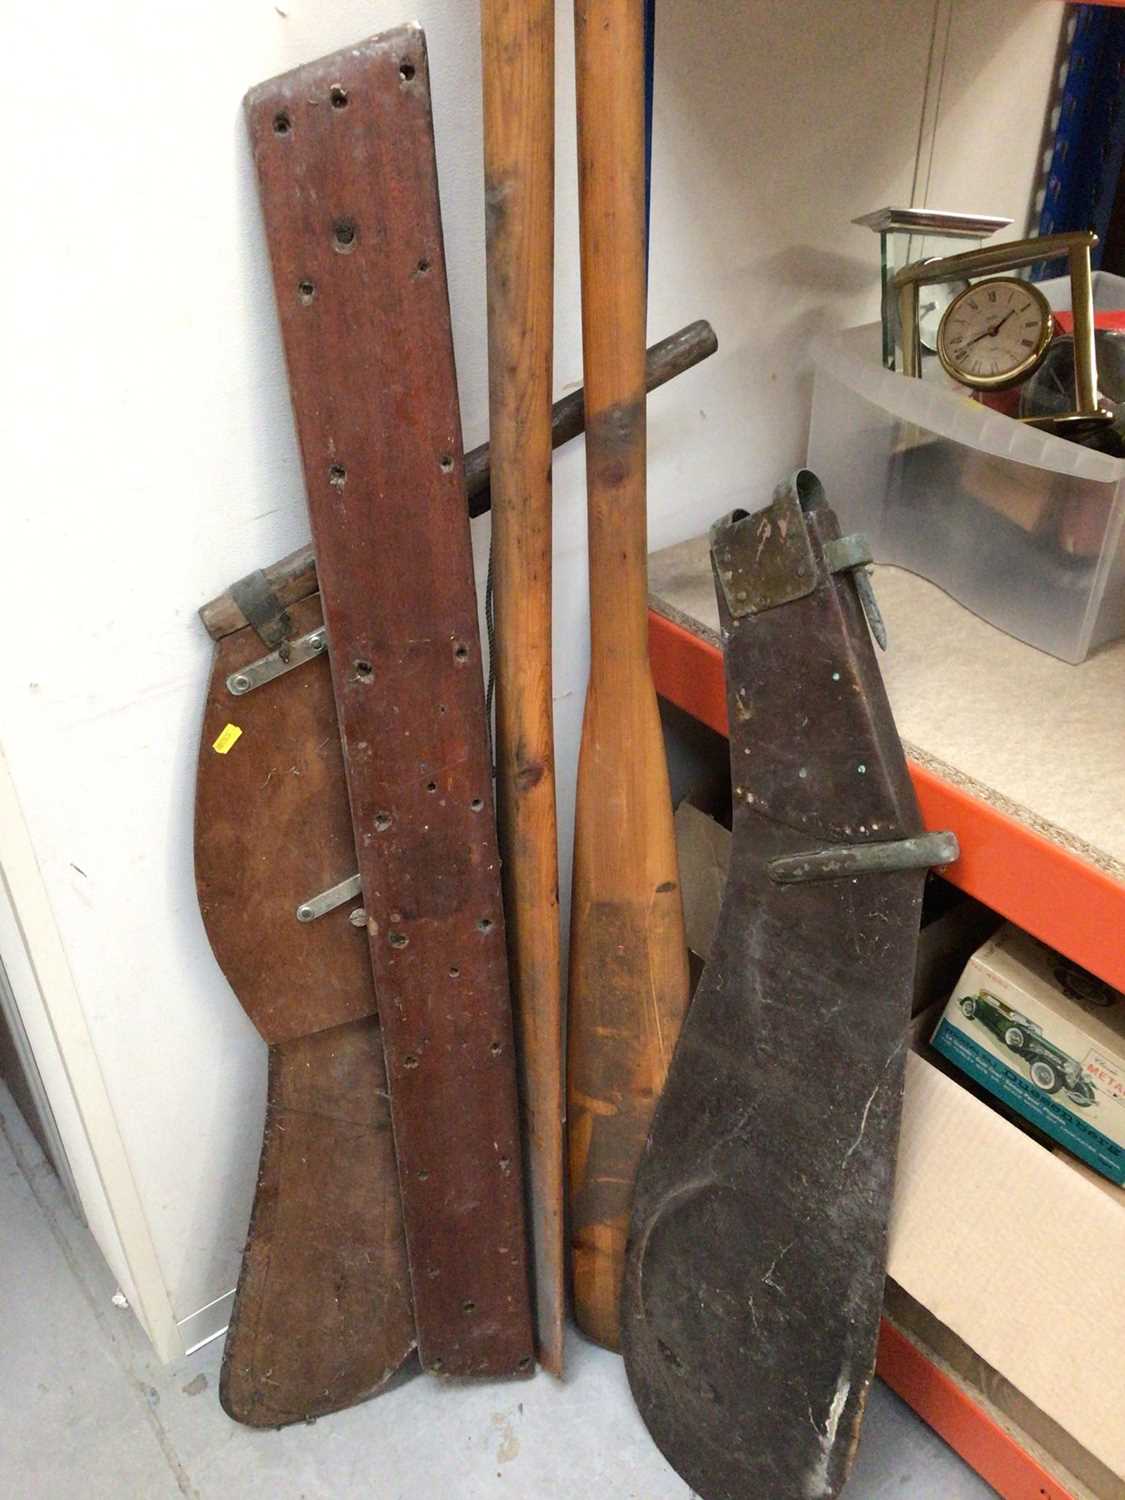 Pair of wooden rowing oars and two wooden sailboat rudders